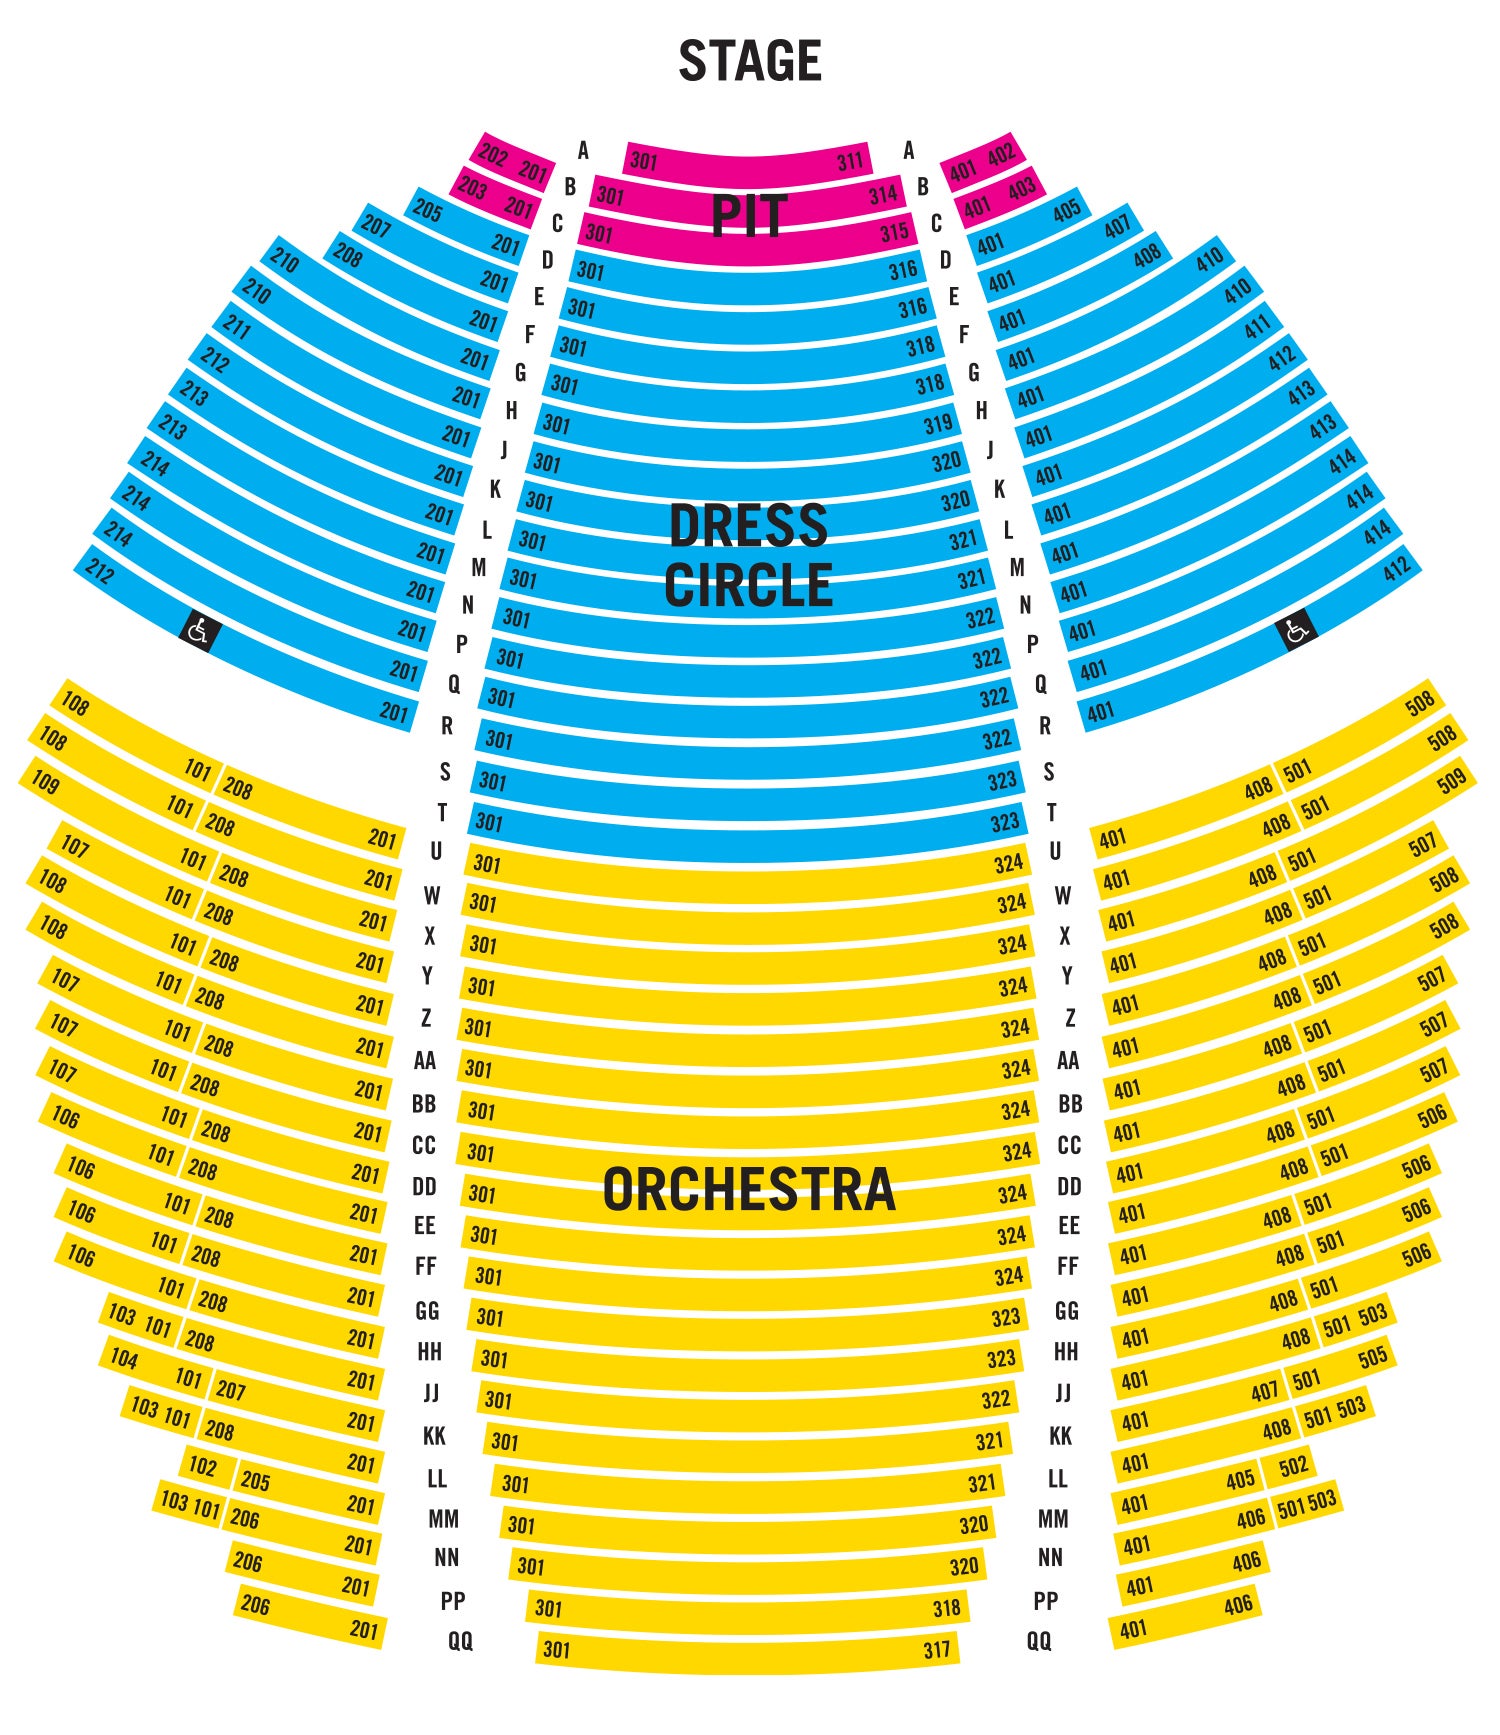 Theatre Cleveland Seating Chart